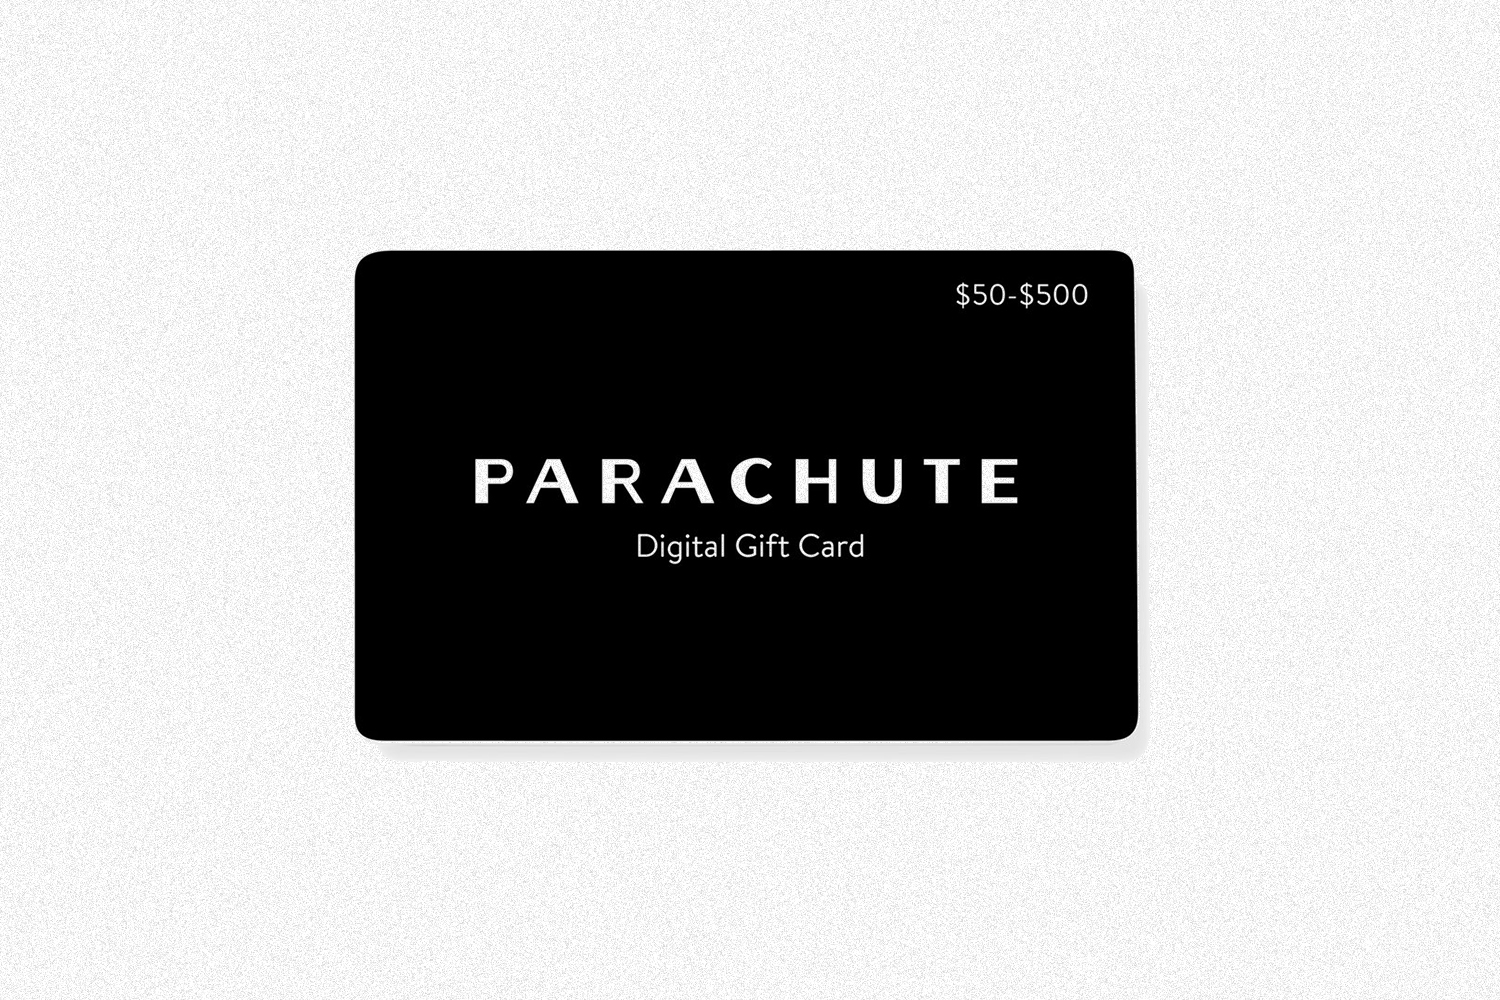 Parachute's Digital Gift Card Is the Perfect Last-Minute Gift - InsideHook